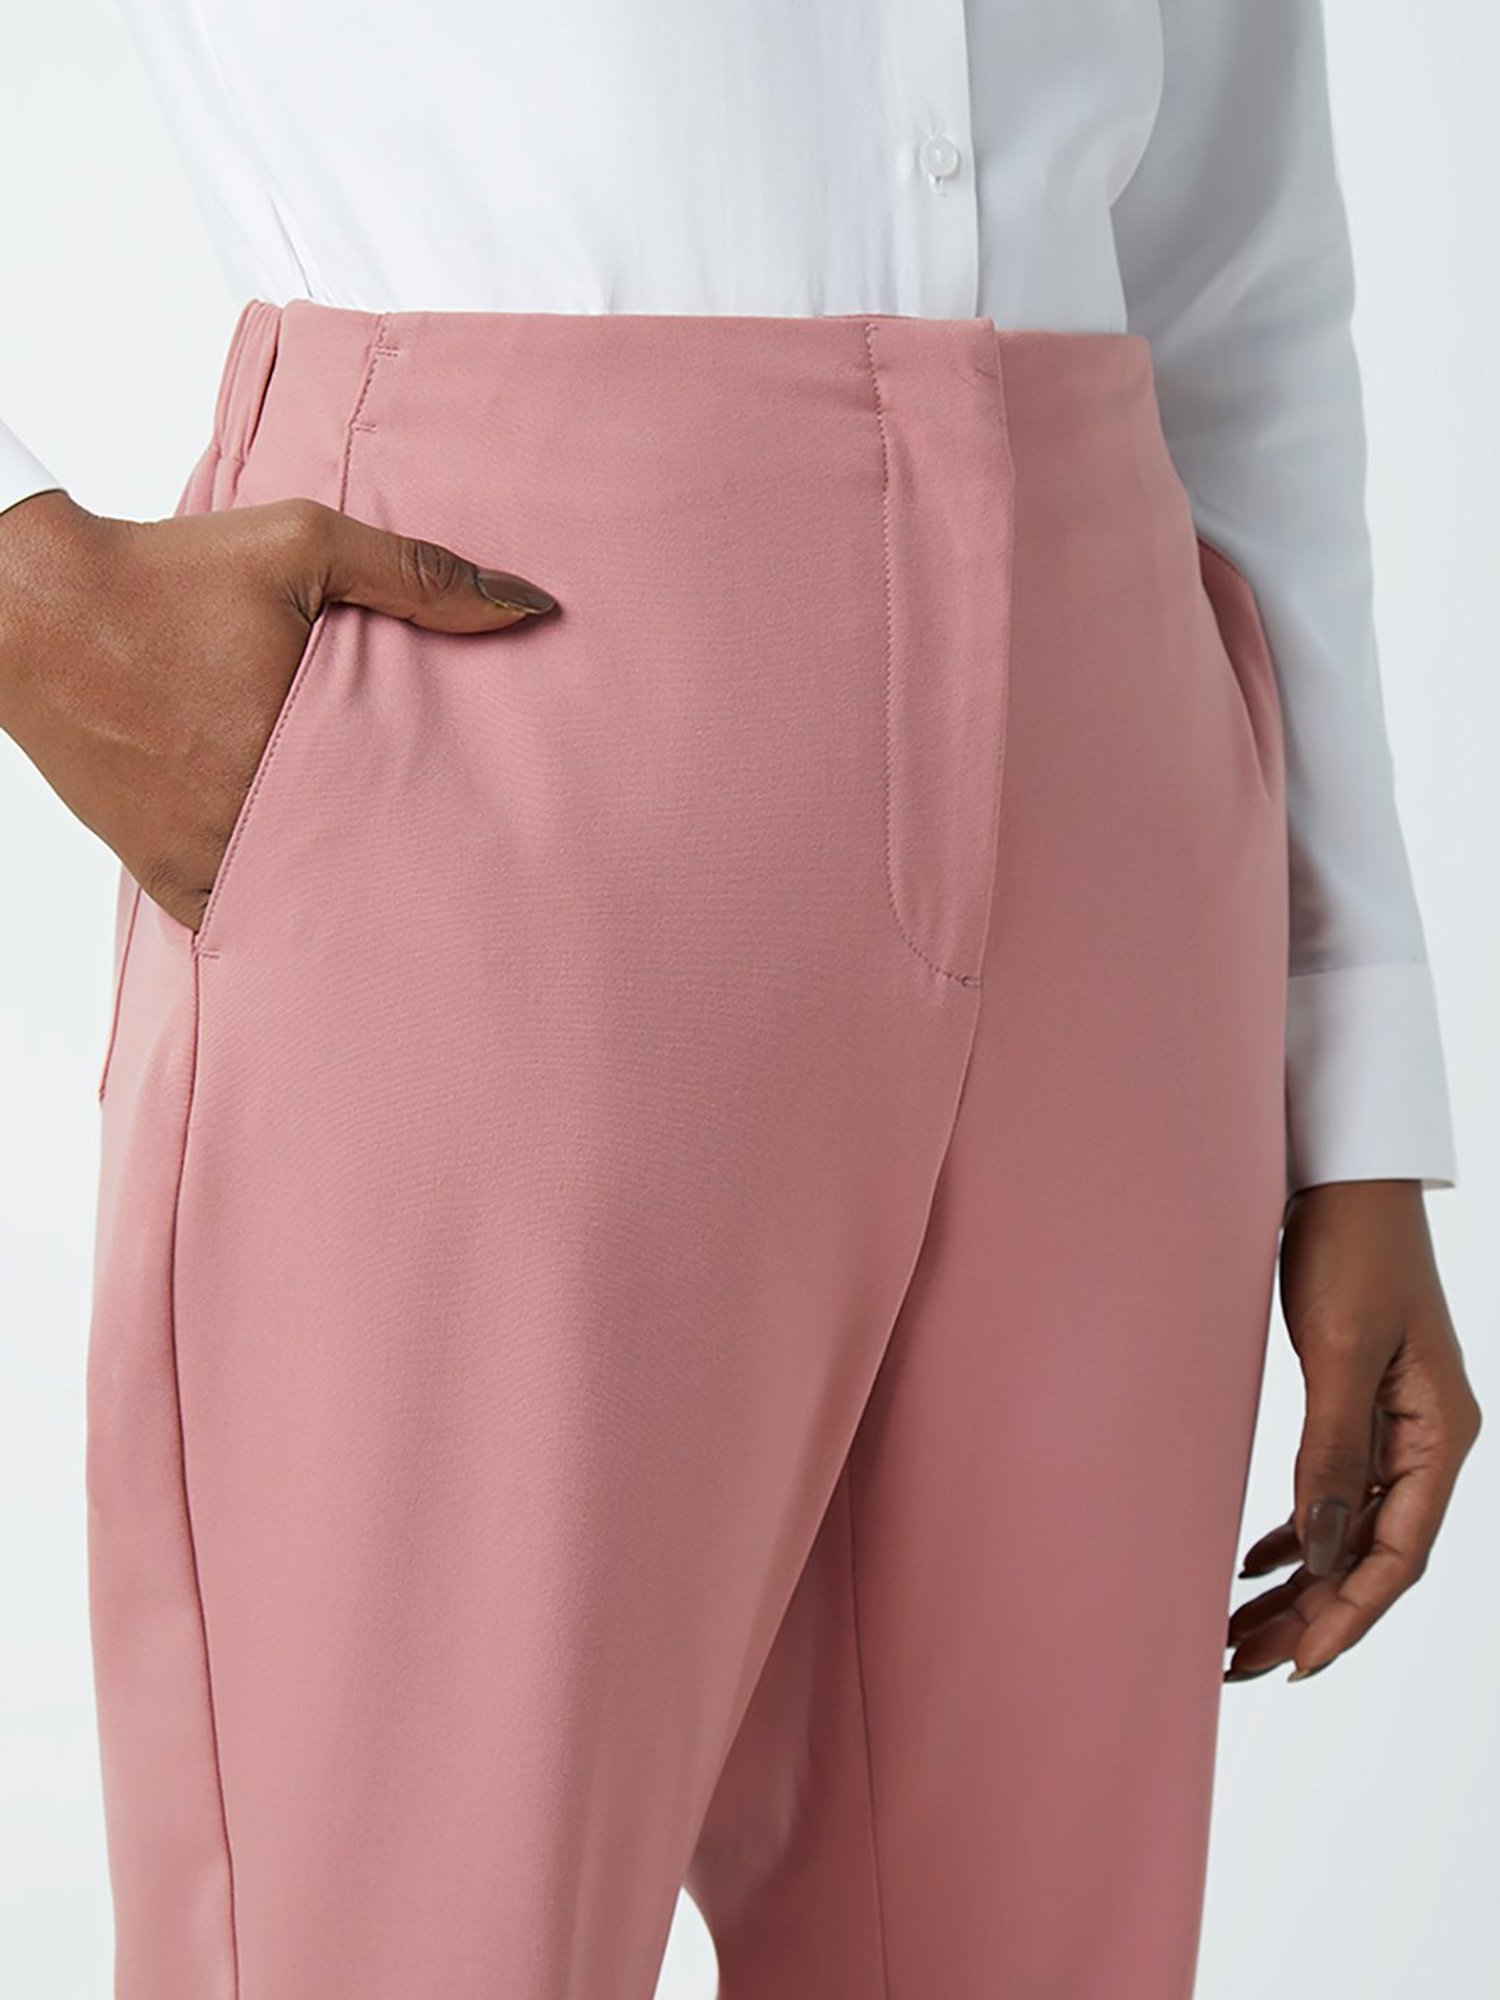 Topshop low rise casual cargo pants with fold over waistband detail in  bright pink | ASOS